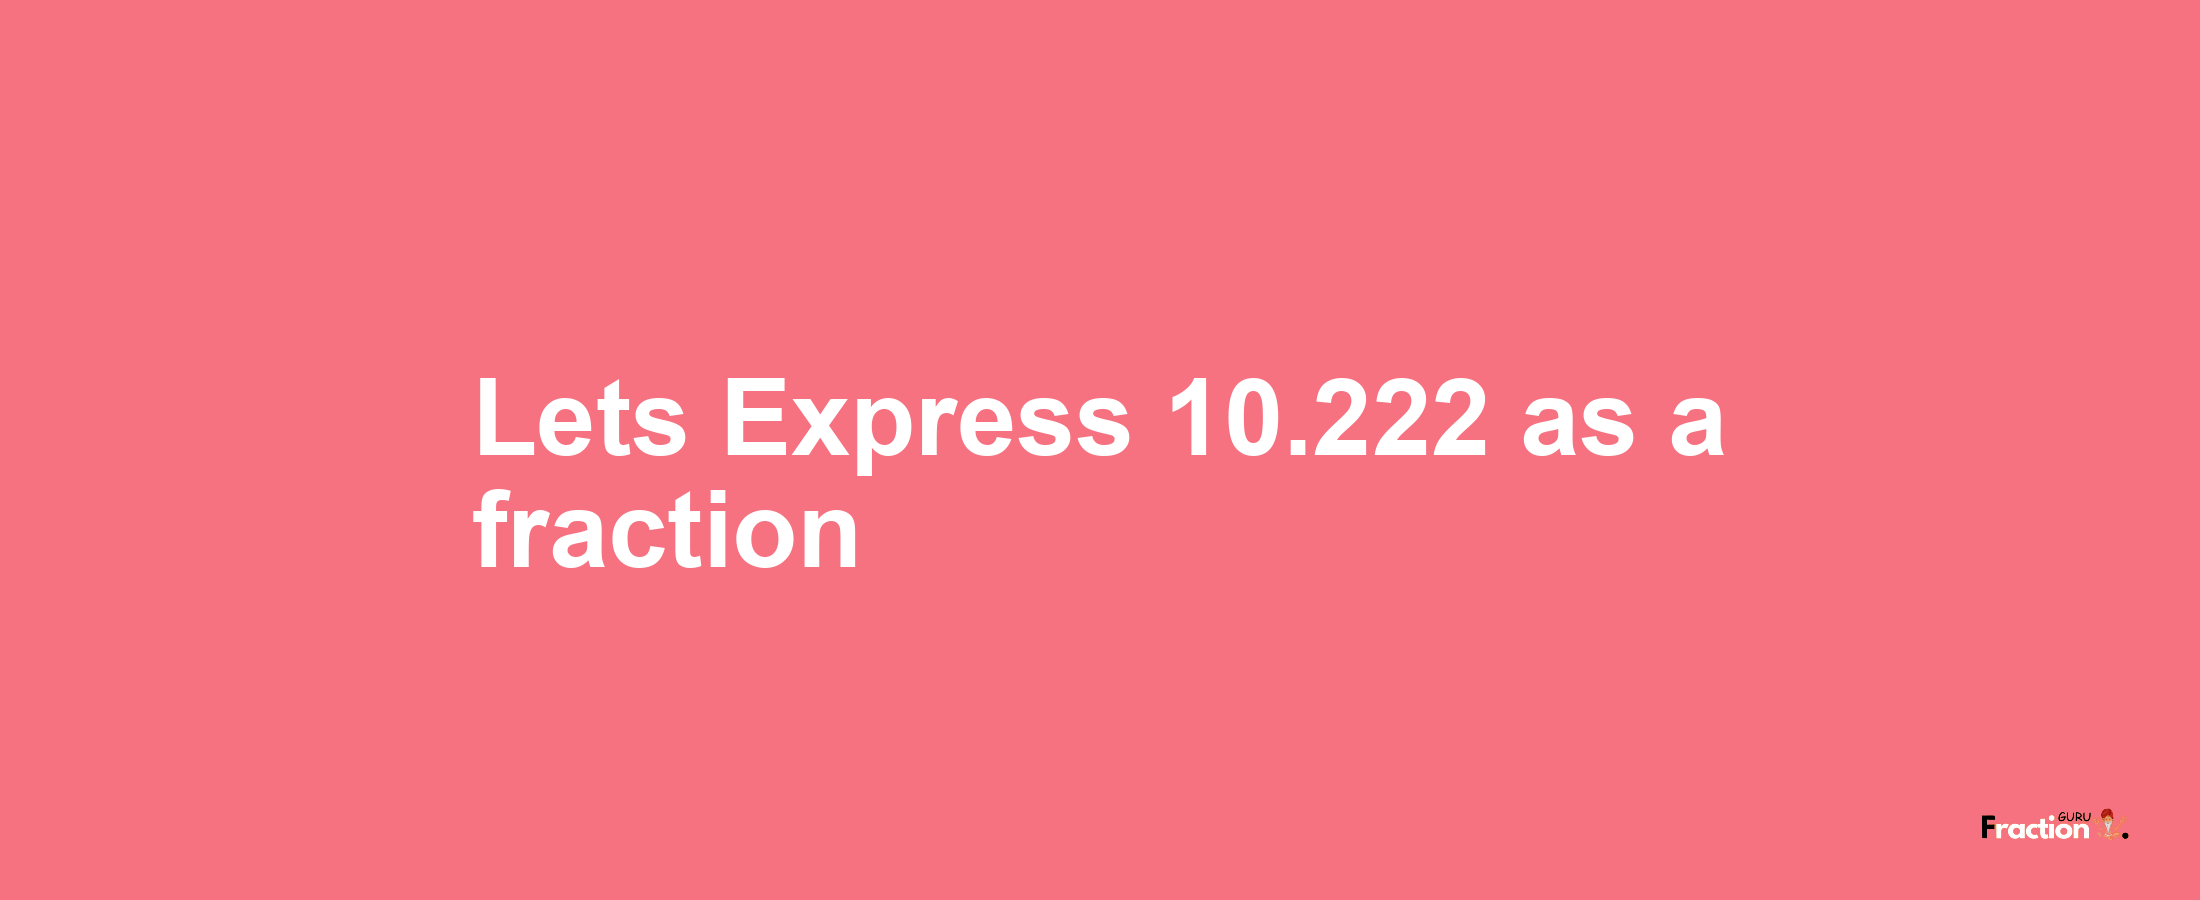 Lets Express 10.222 as afraction